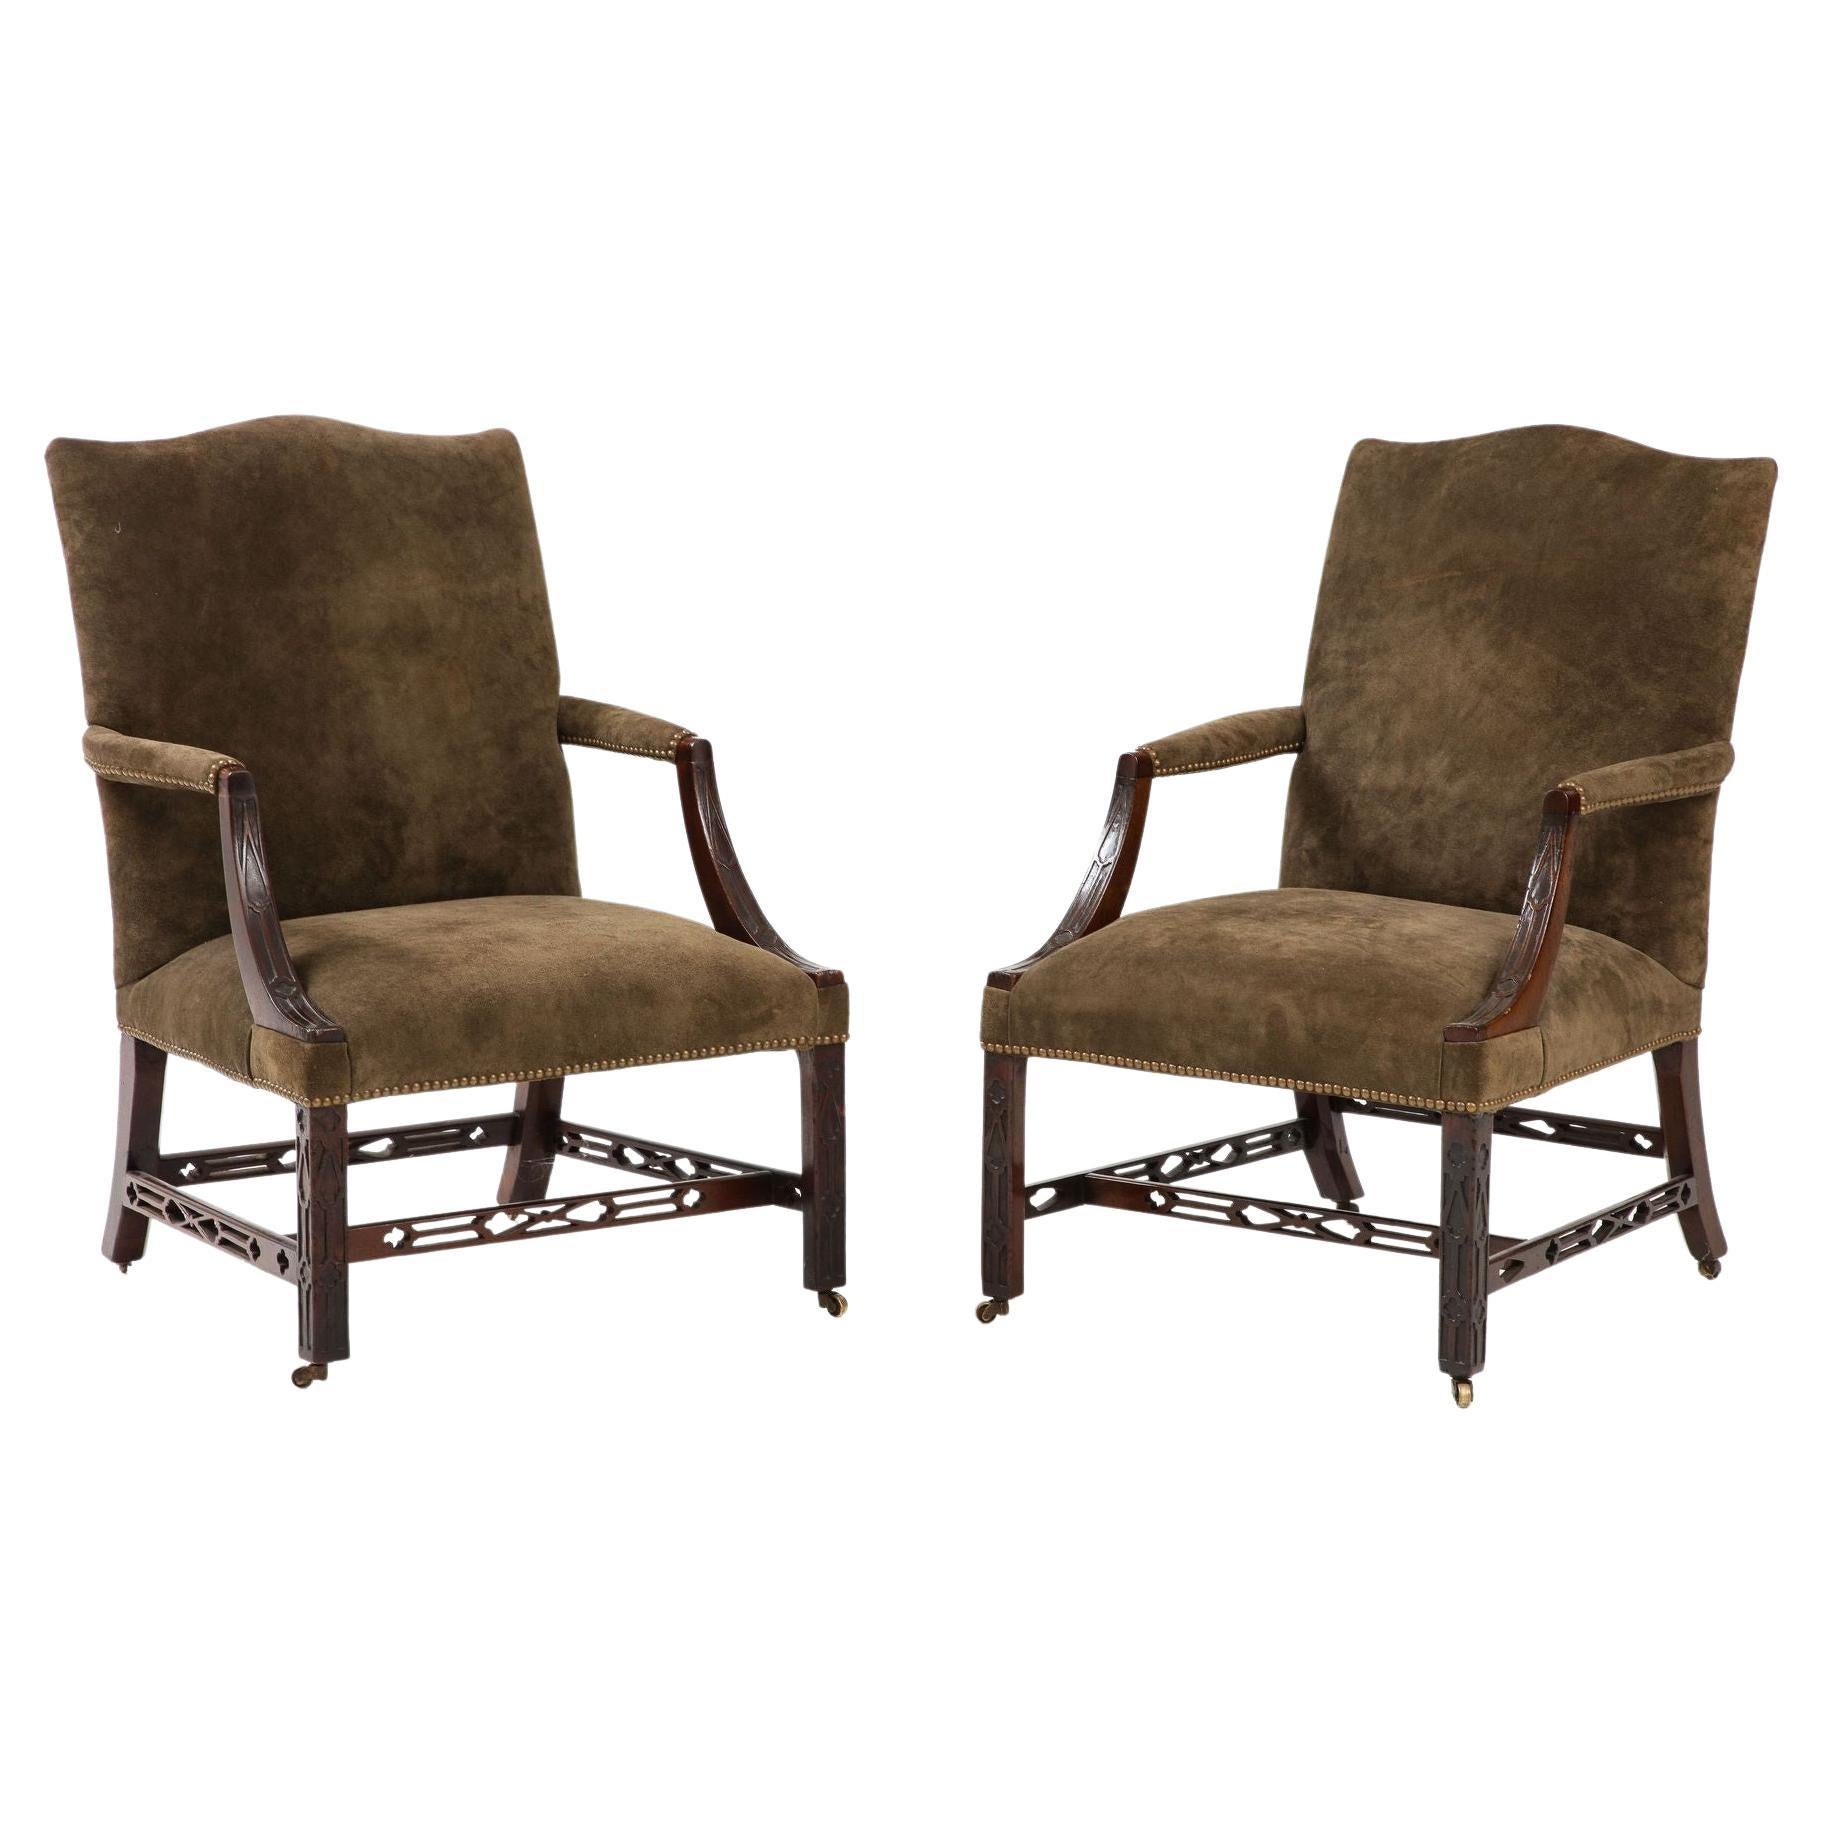 Matched Pair of George III Gainsborough Chairs For Sale